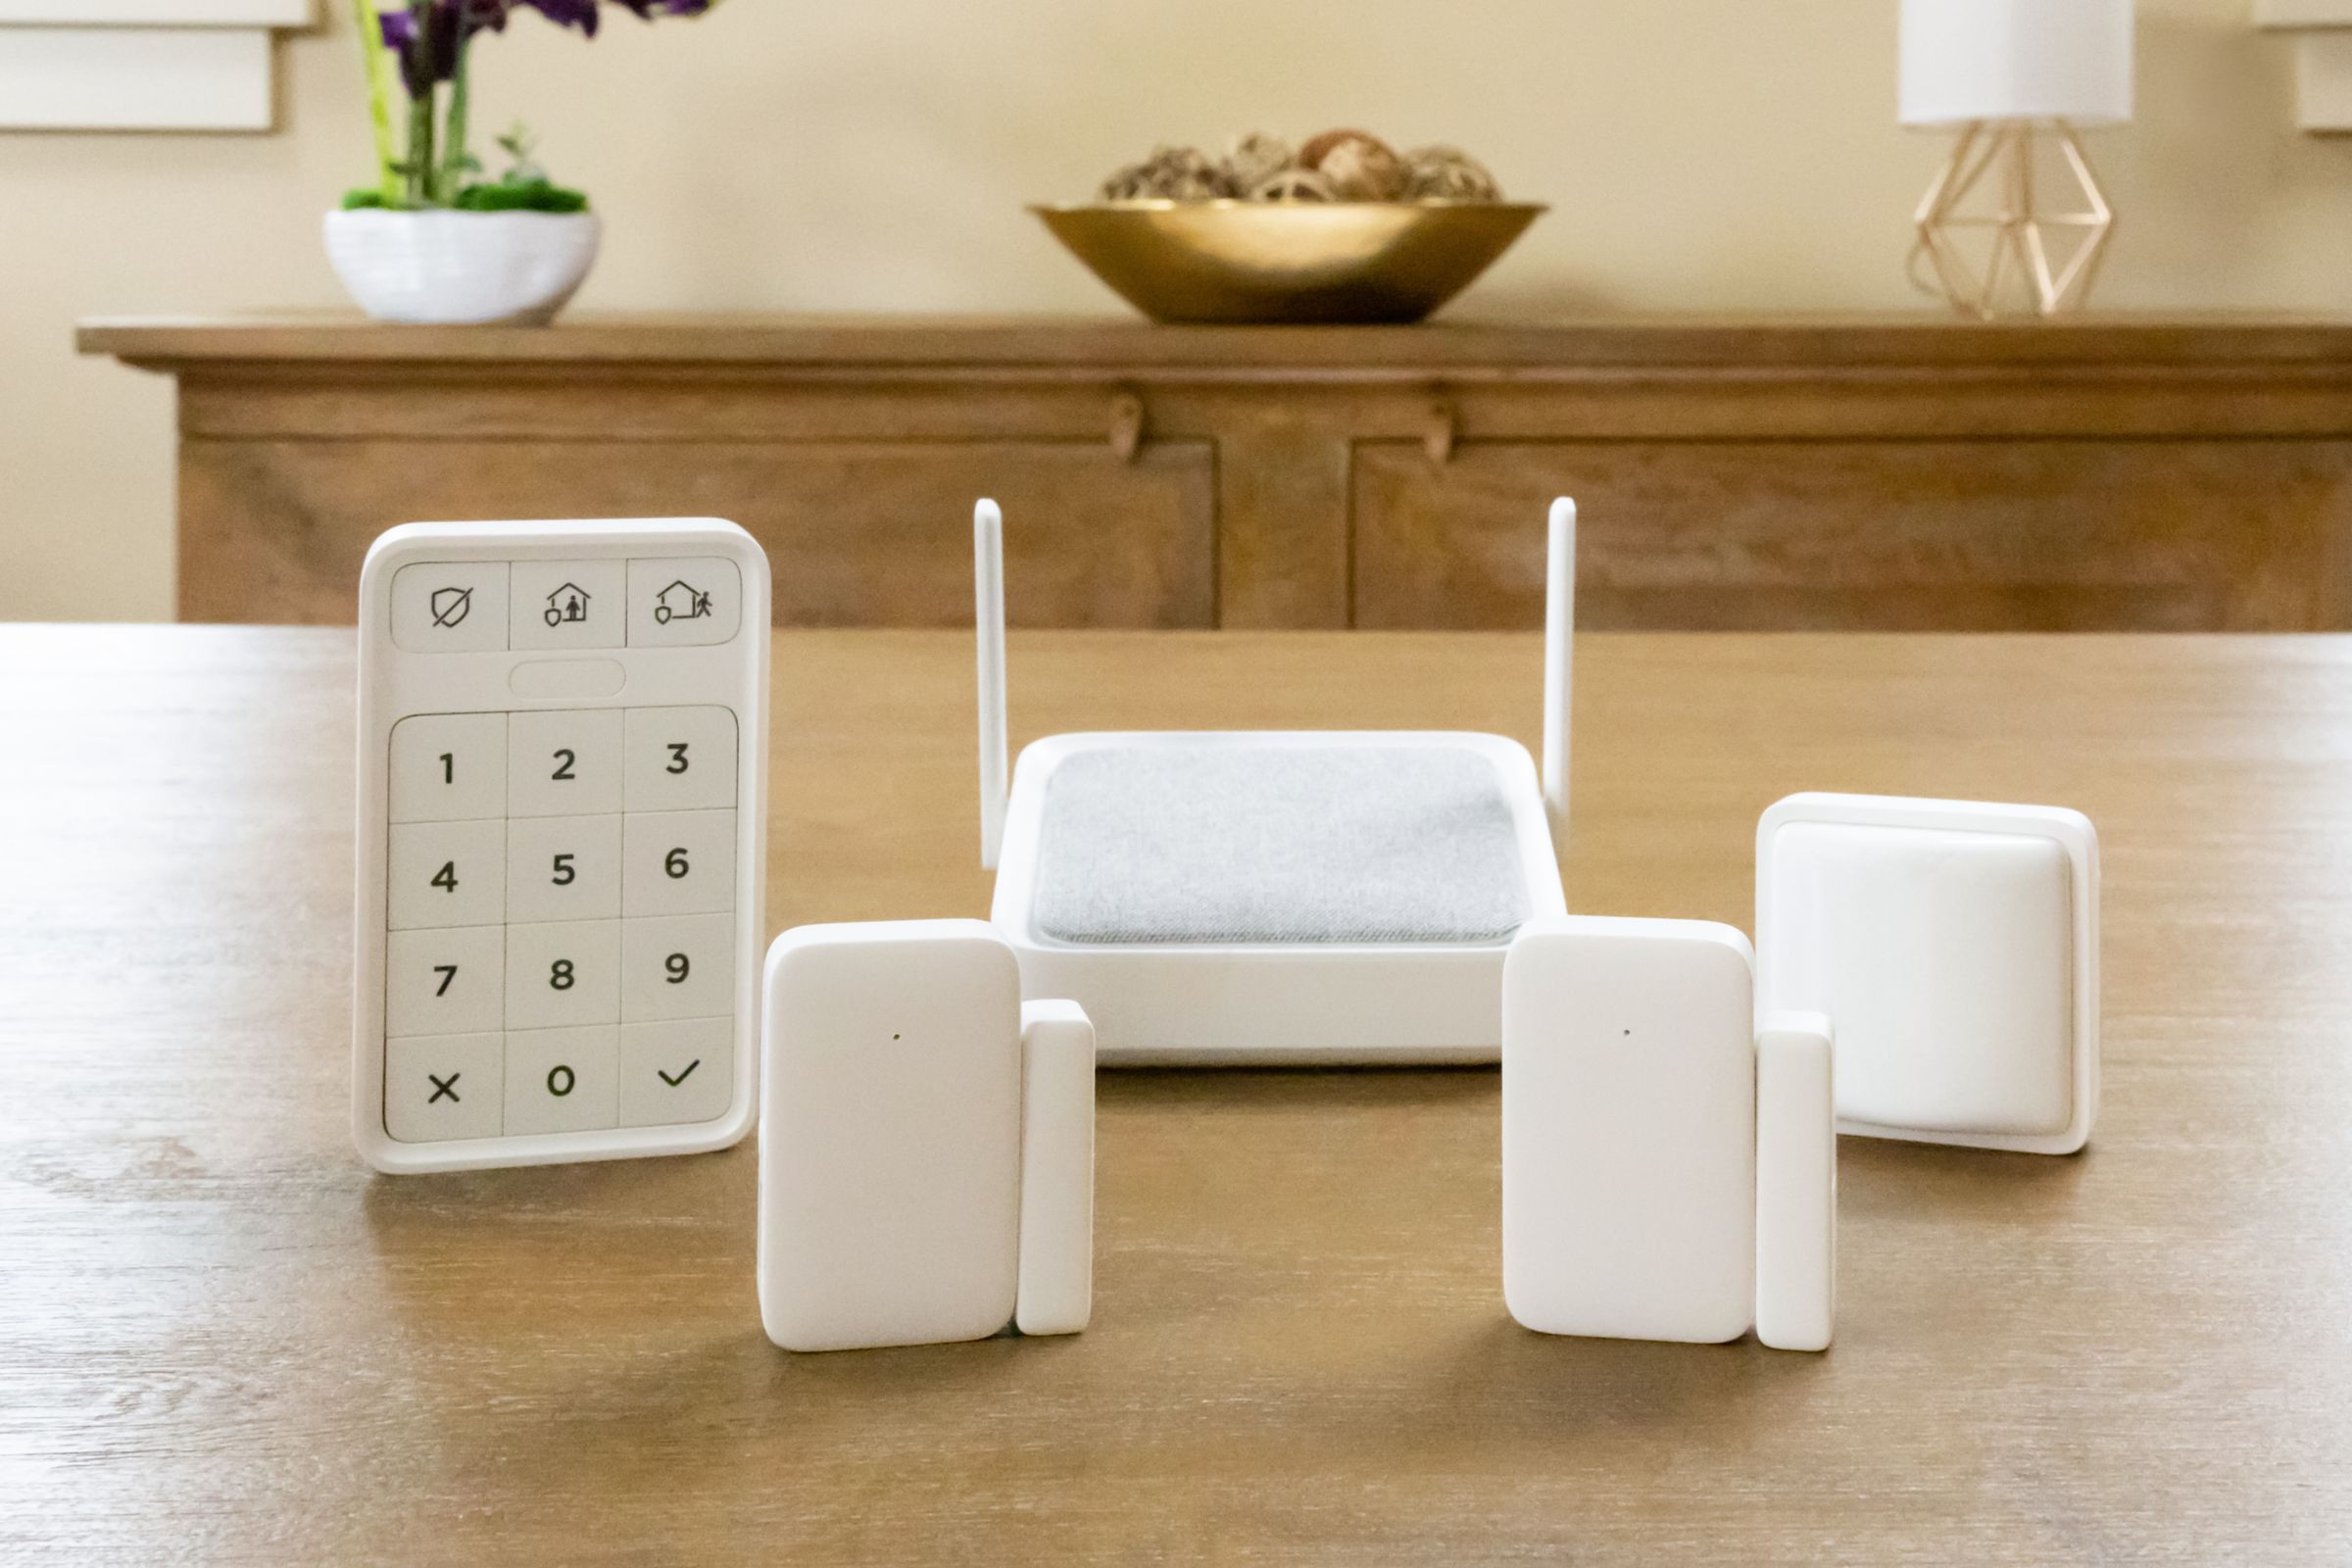 A five-piece white security system on a wooden tabletop in a living room.